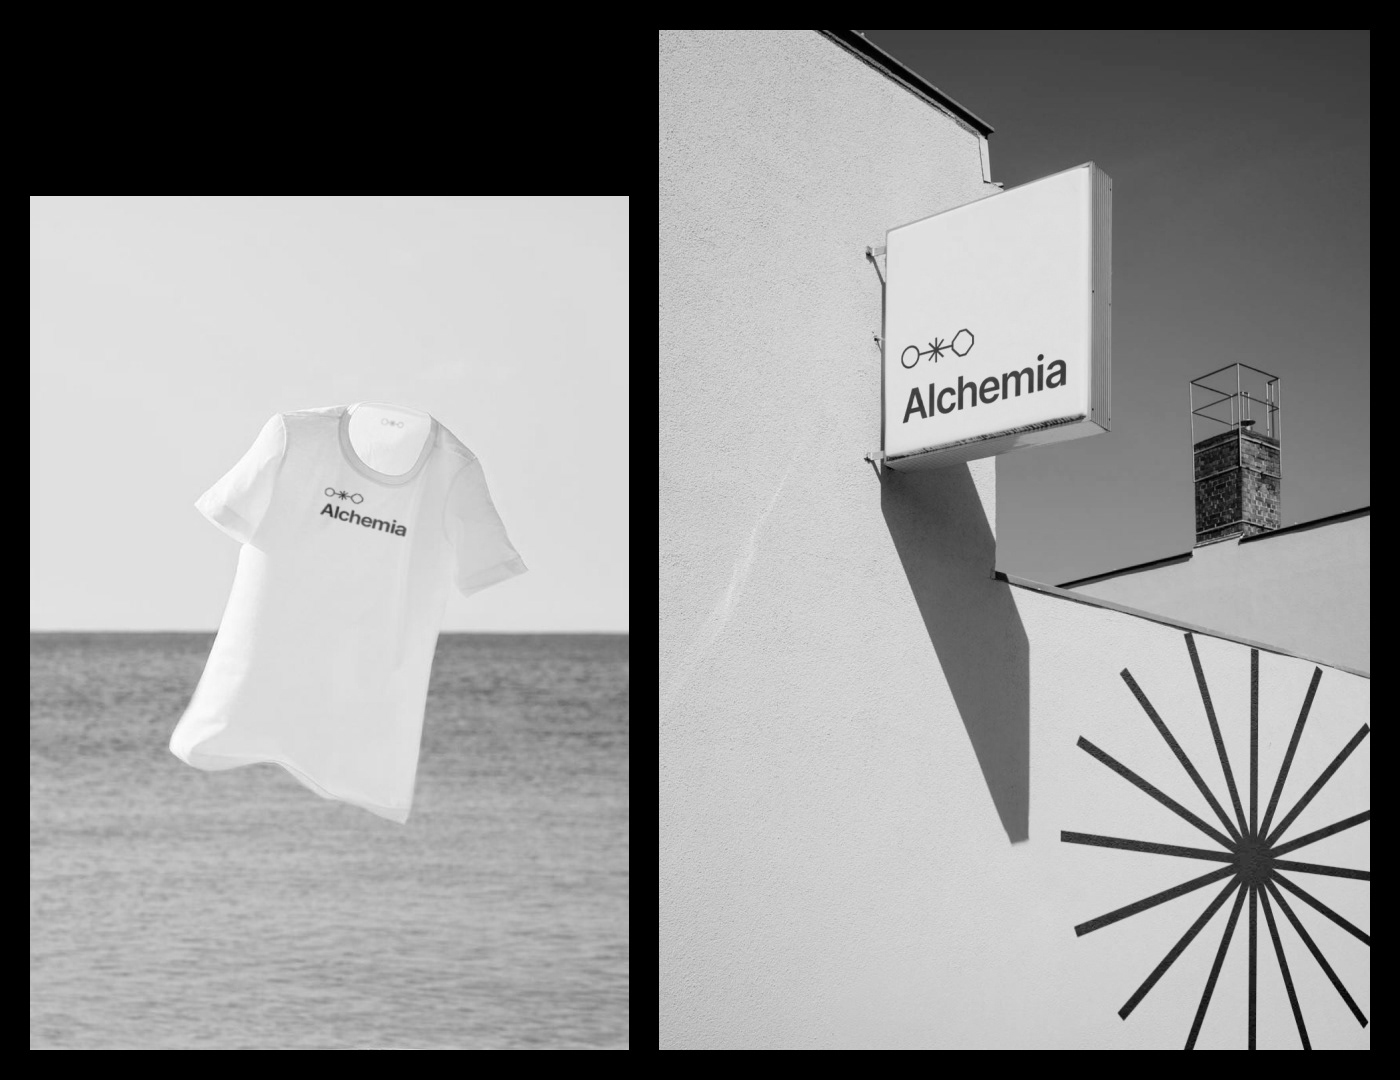 Black and White Mockups of Alchemia Brand Mark - Tshirt floating and Sign Mockup